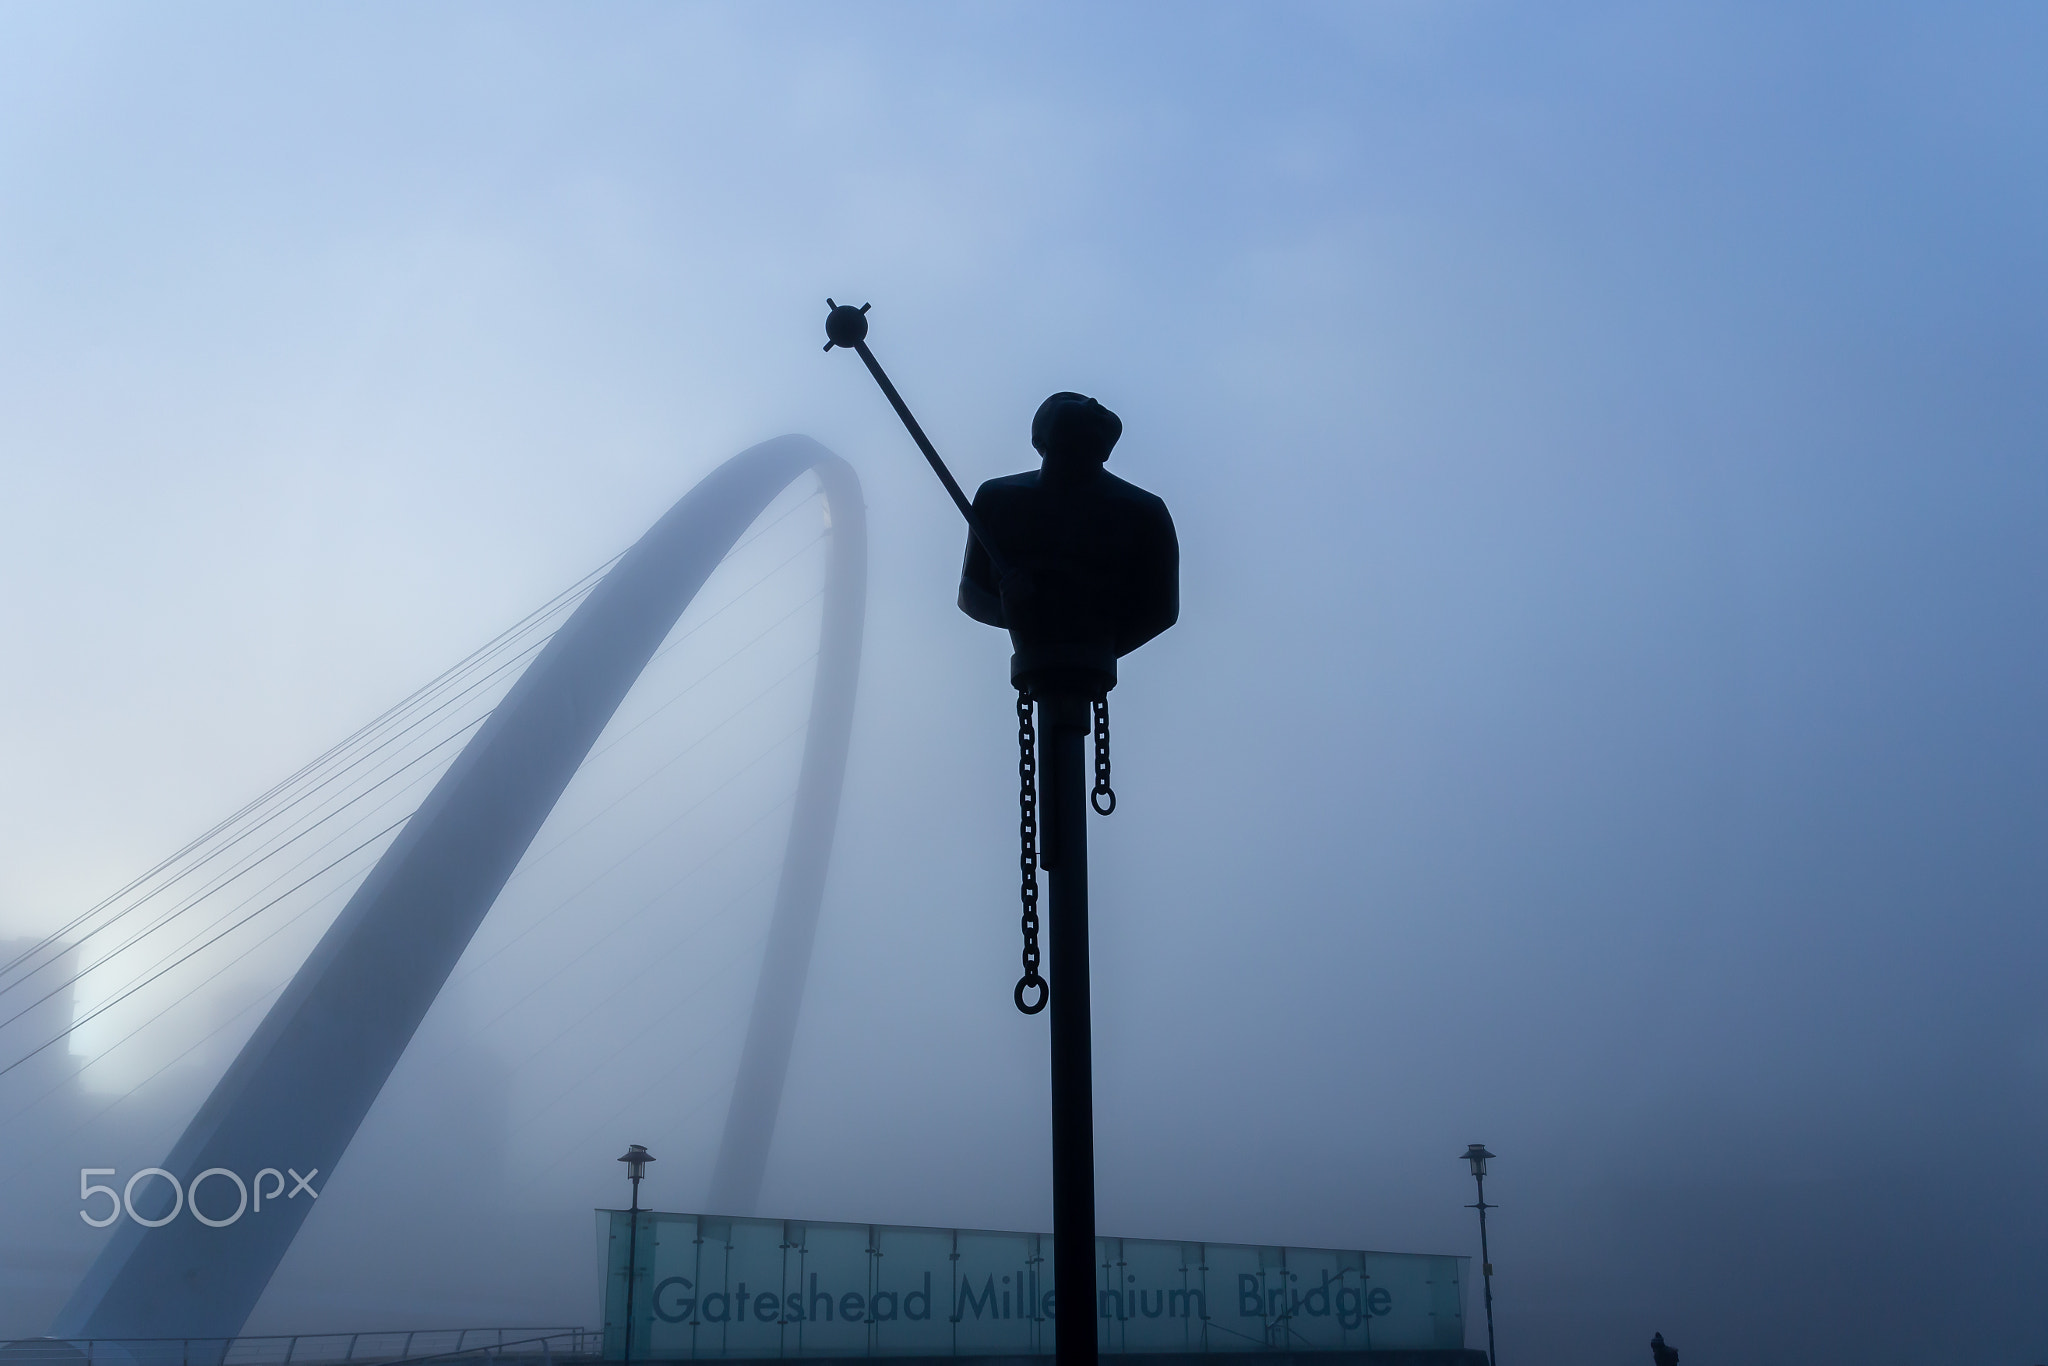 River God sculpture shrouded in fog at the Quayside, Newcastle, UK